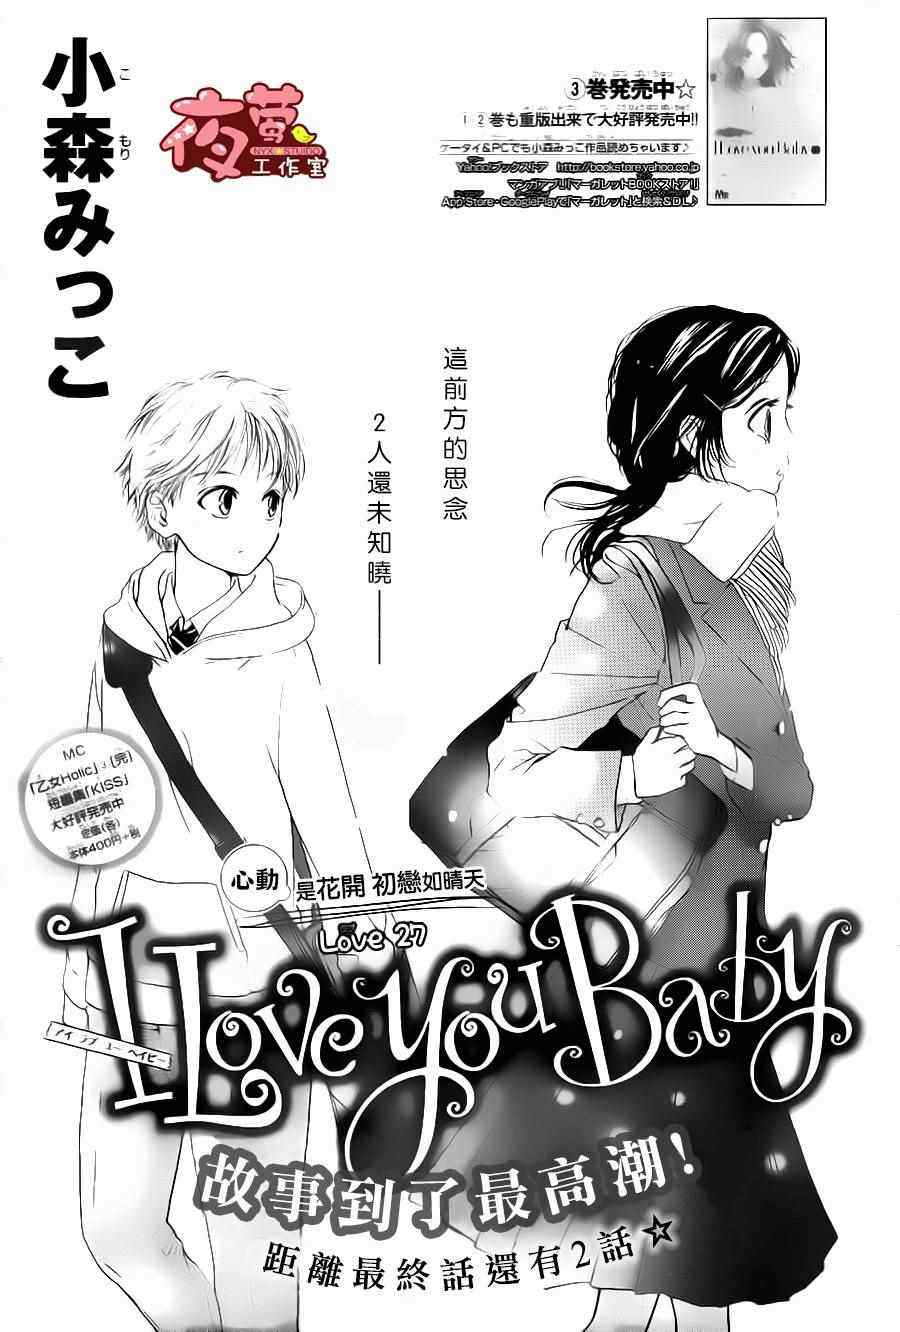 I love you baby - 第27話 - 1